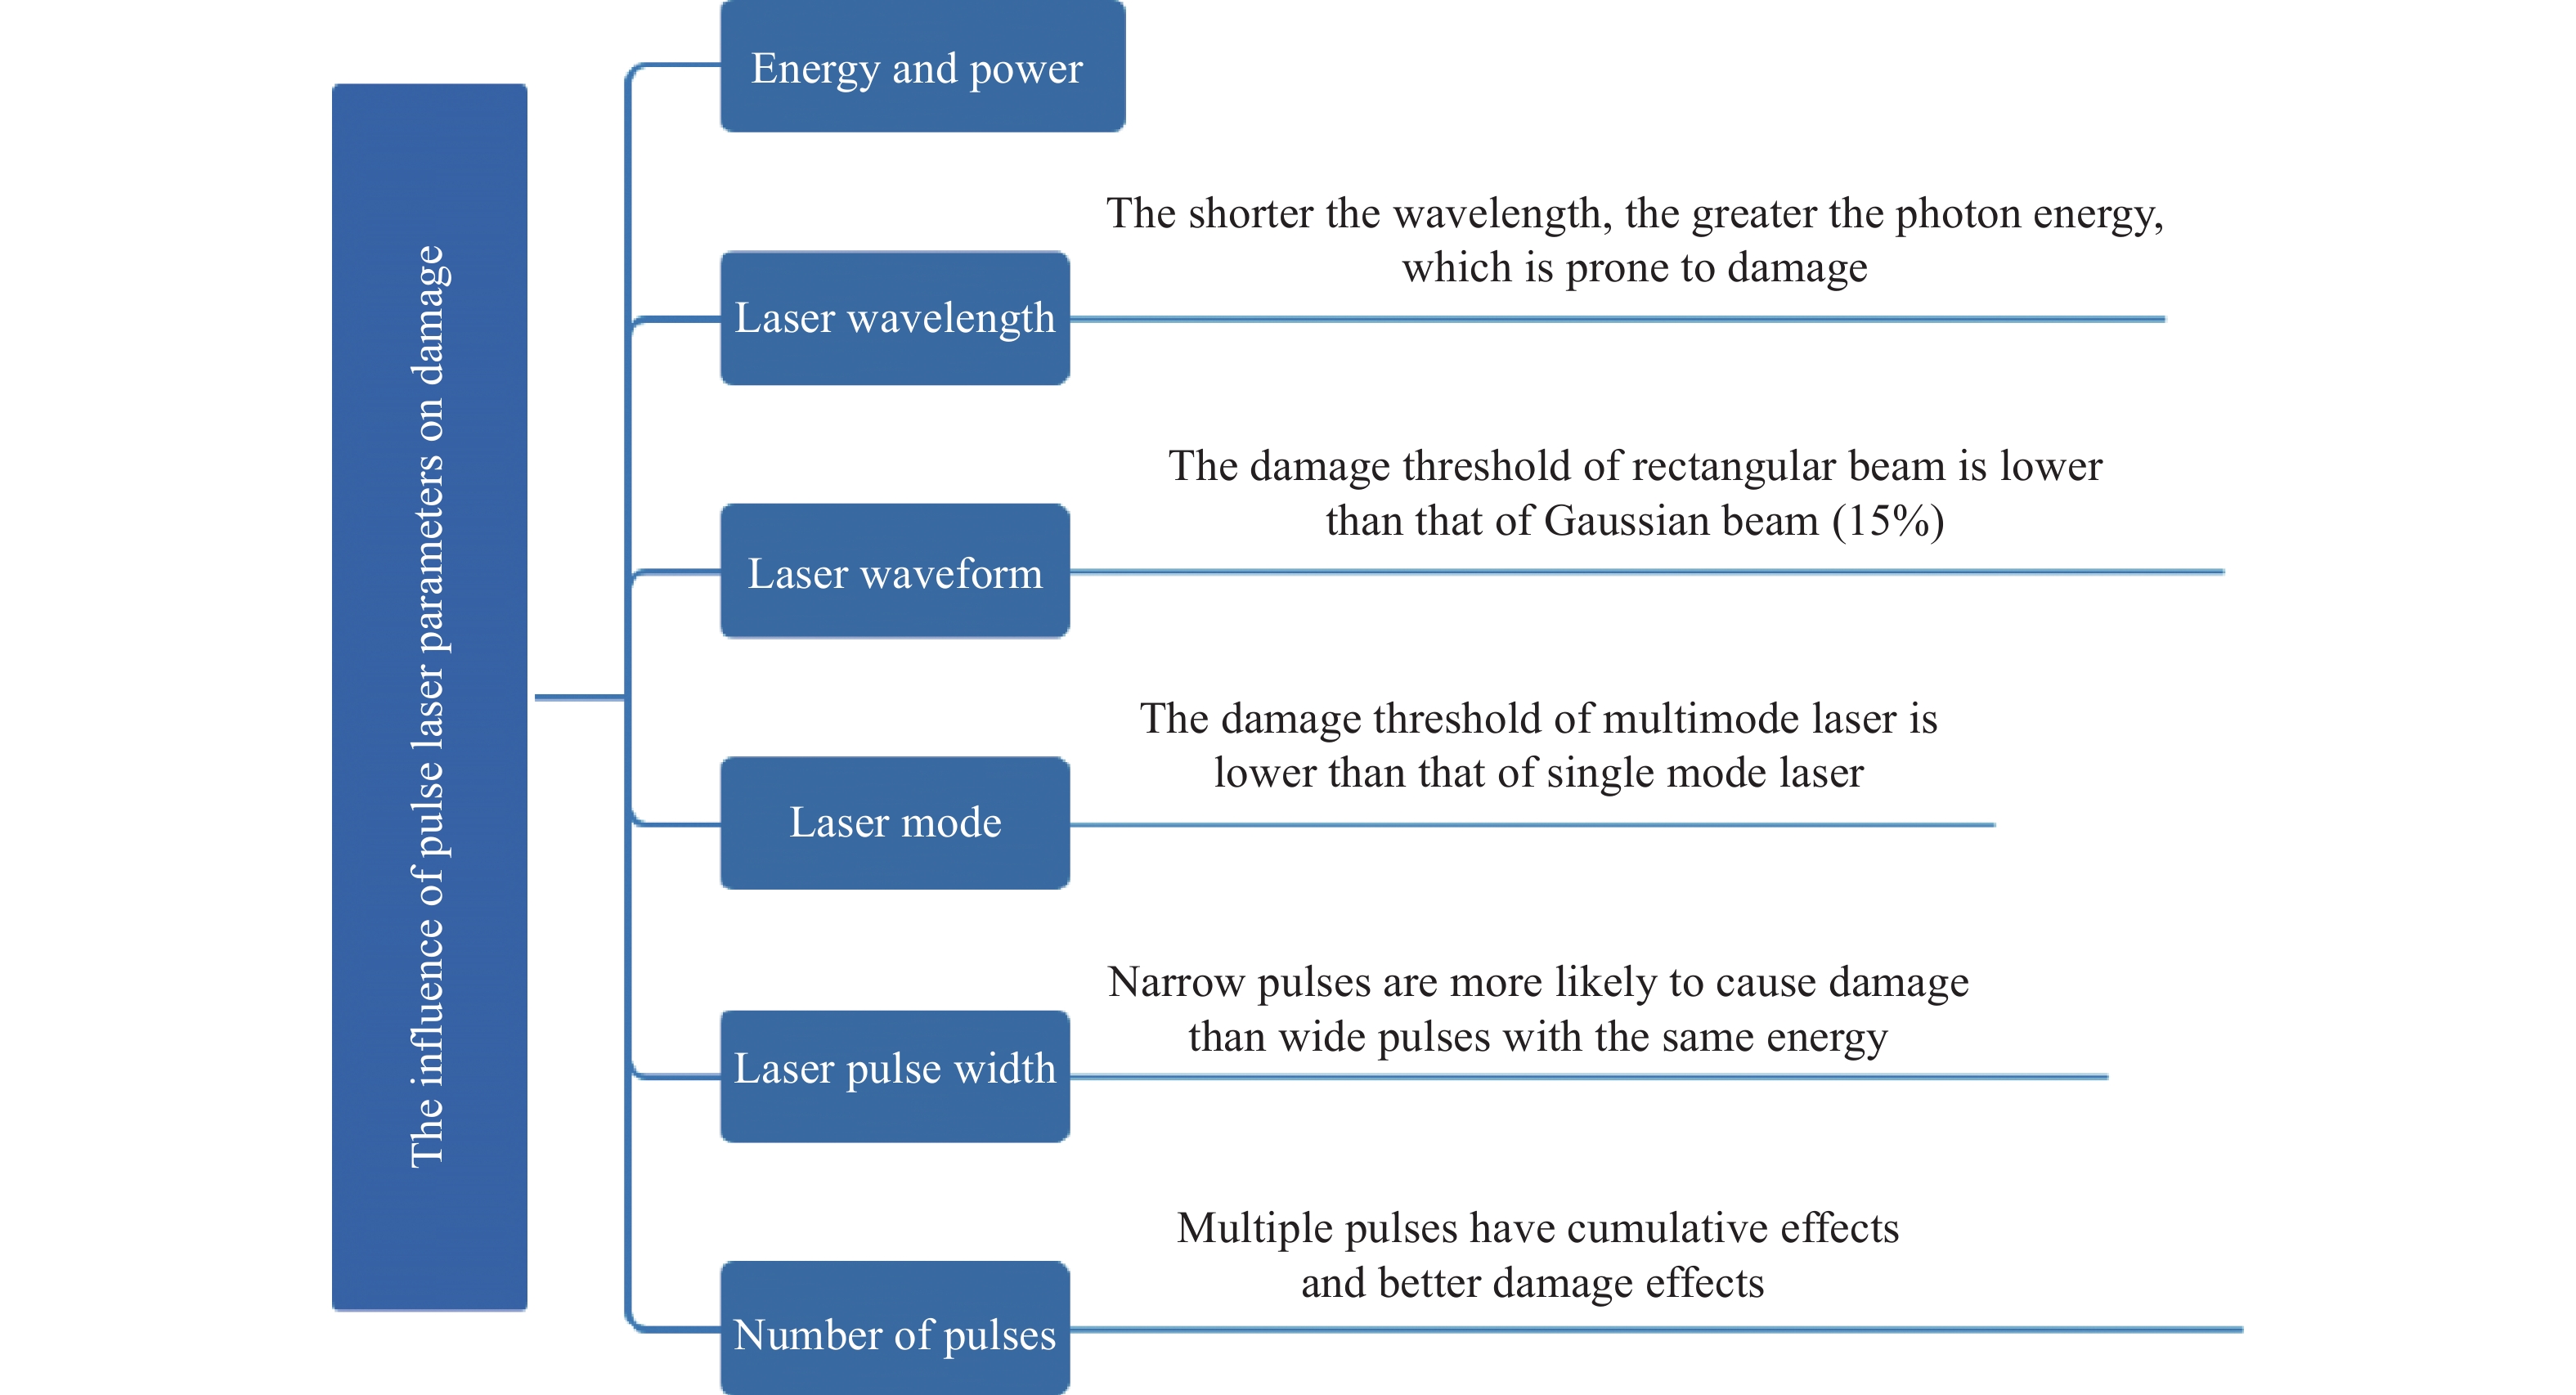 Effect of pulsed laser parameters on damage